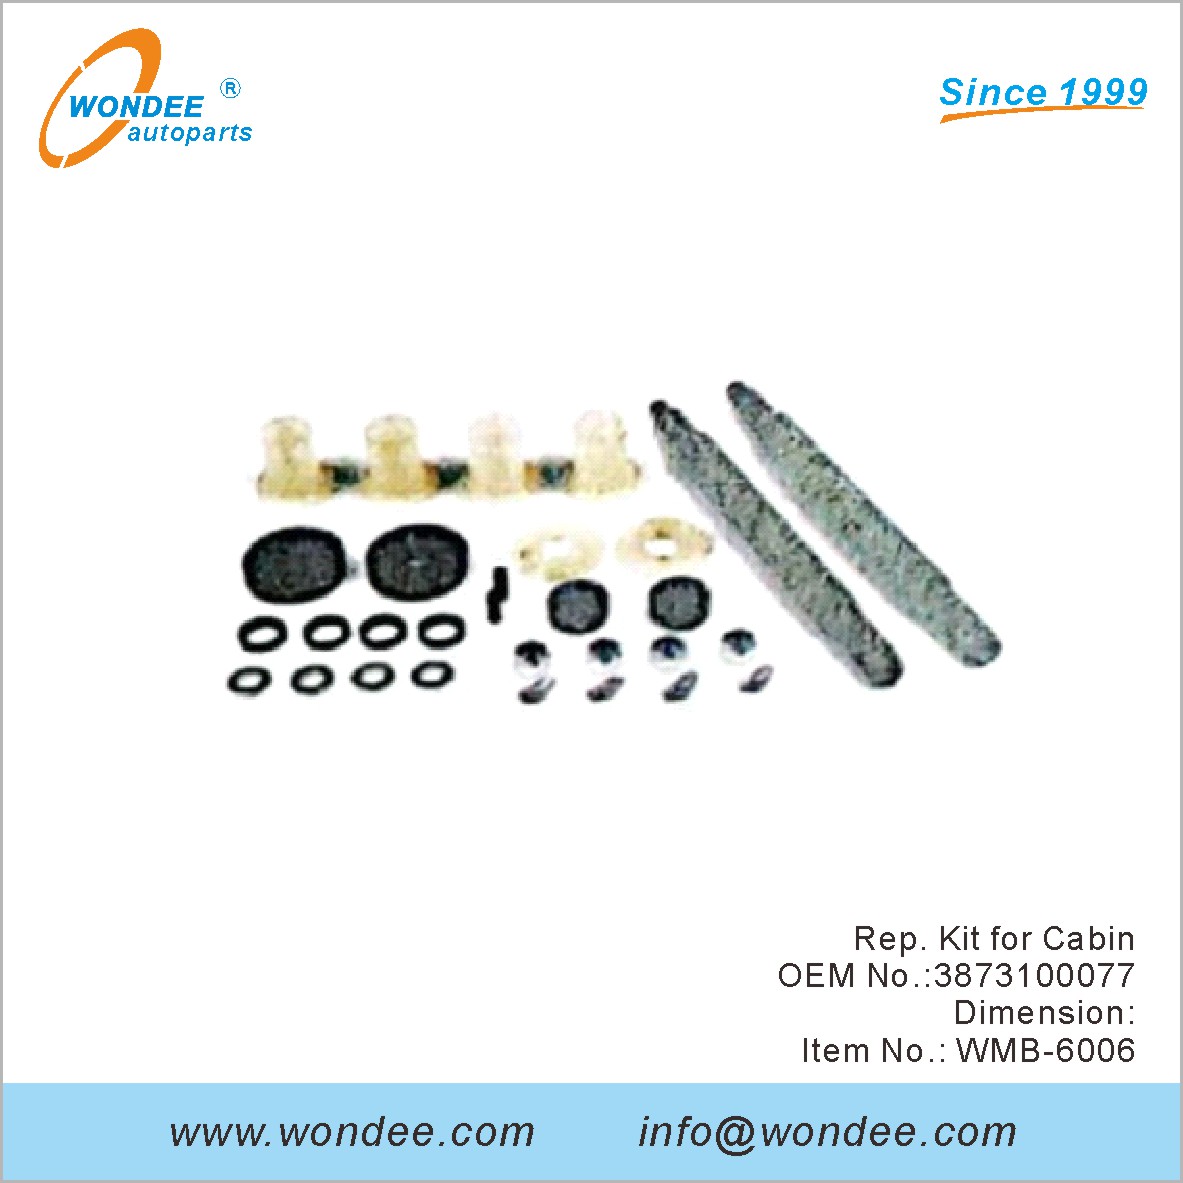 Rep. Kit for Cabin OEM 3873100077 for Benz from WONDEE